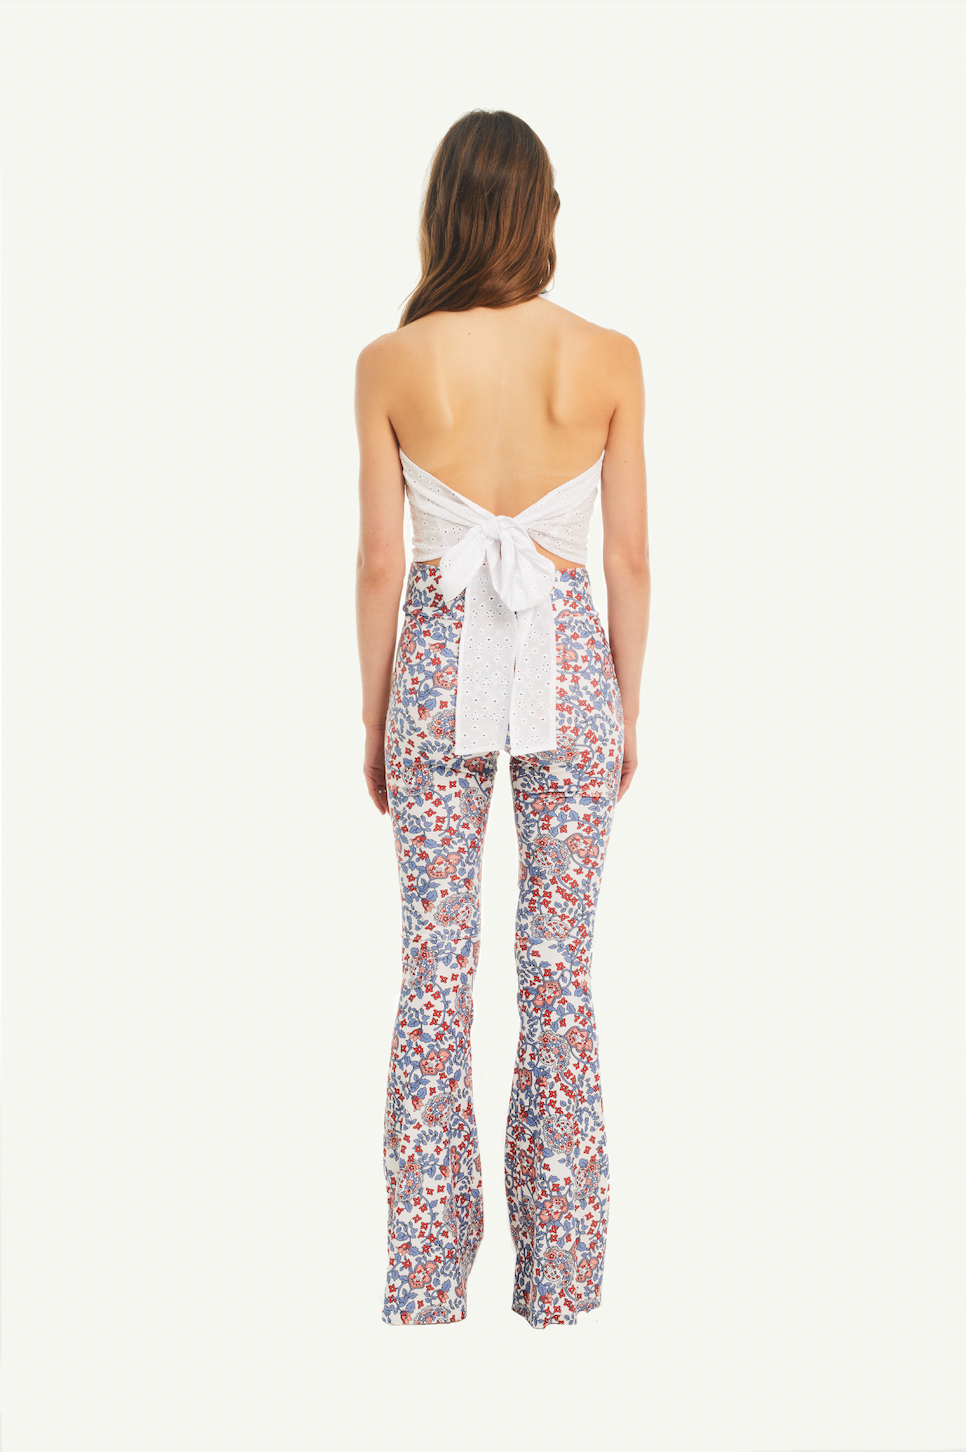 ORCHIDEA - blouse with front volant and nude back in cotton Kew print